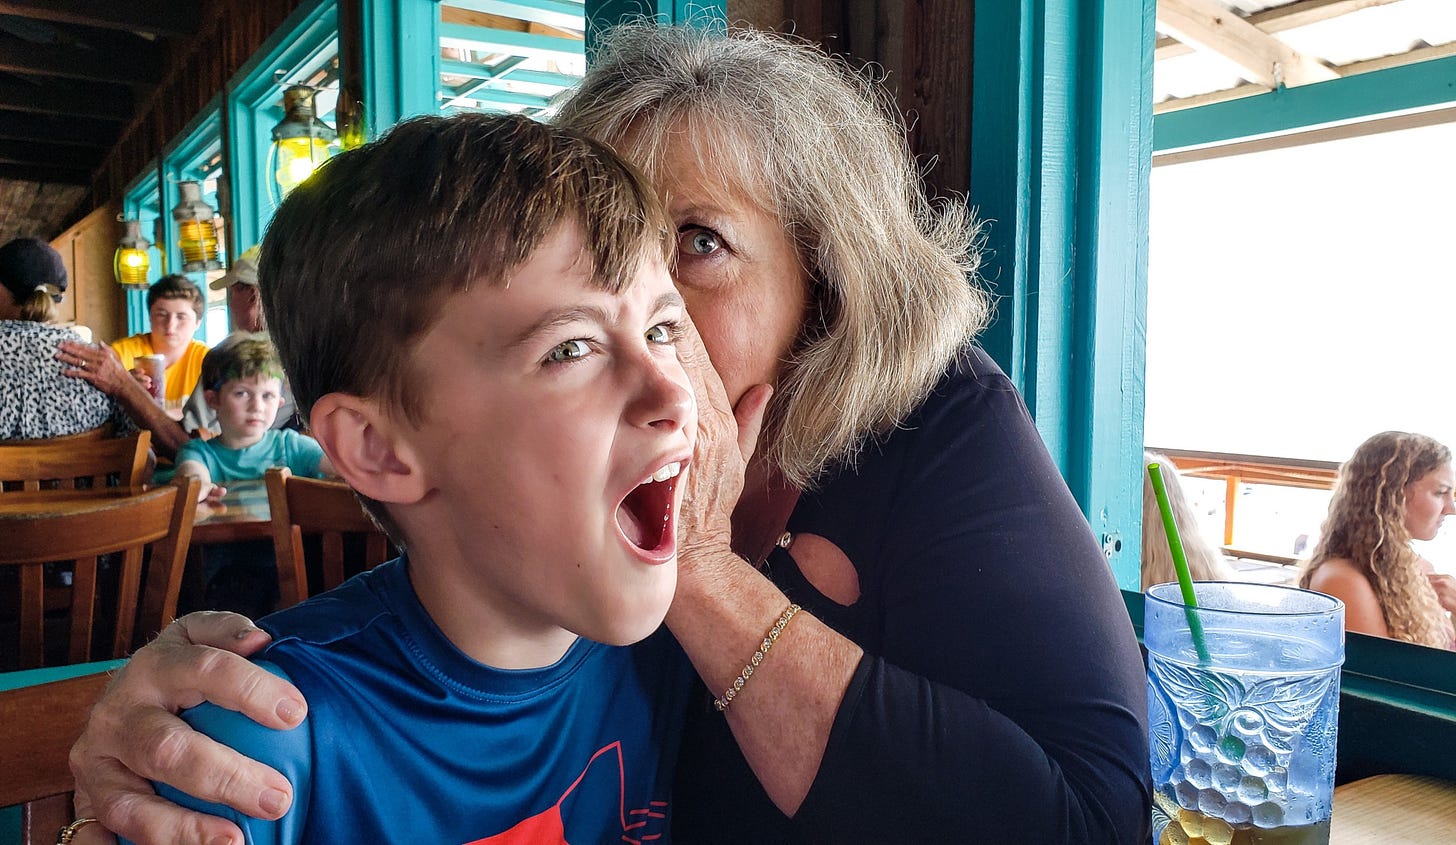 A grandmother clutches her grandchild and whispers in his ear. His face is one of shock.